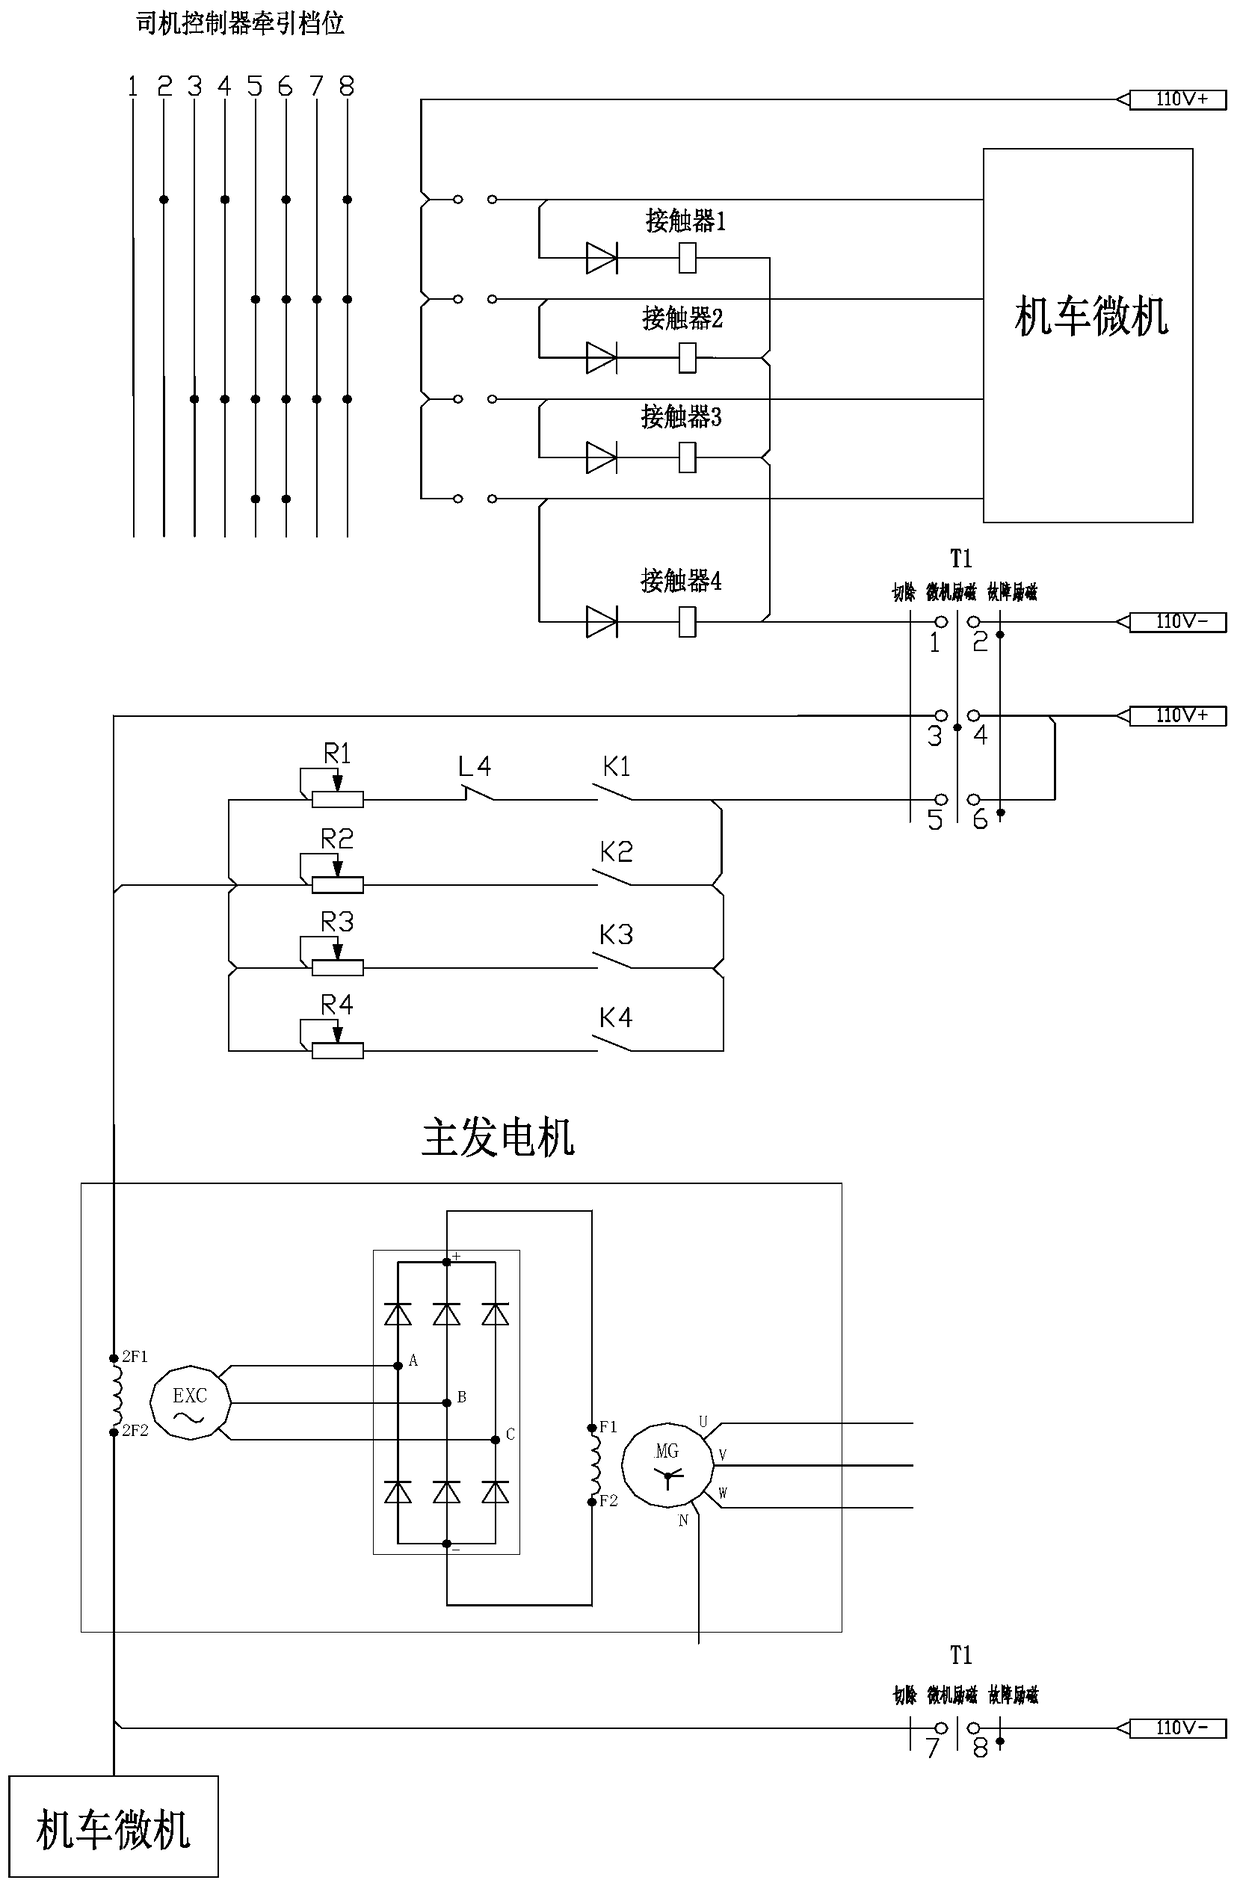 Main generator excitation current variable level control circuit when the locomotive microcomputer excitation control fails